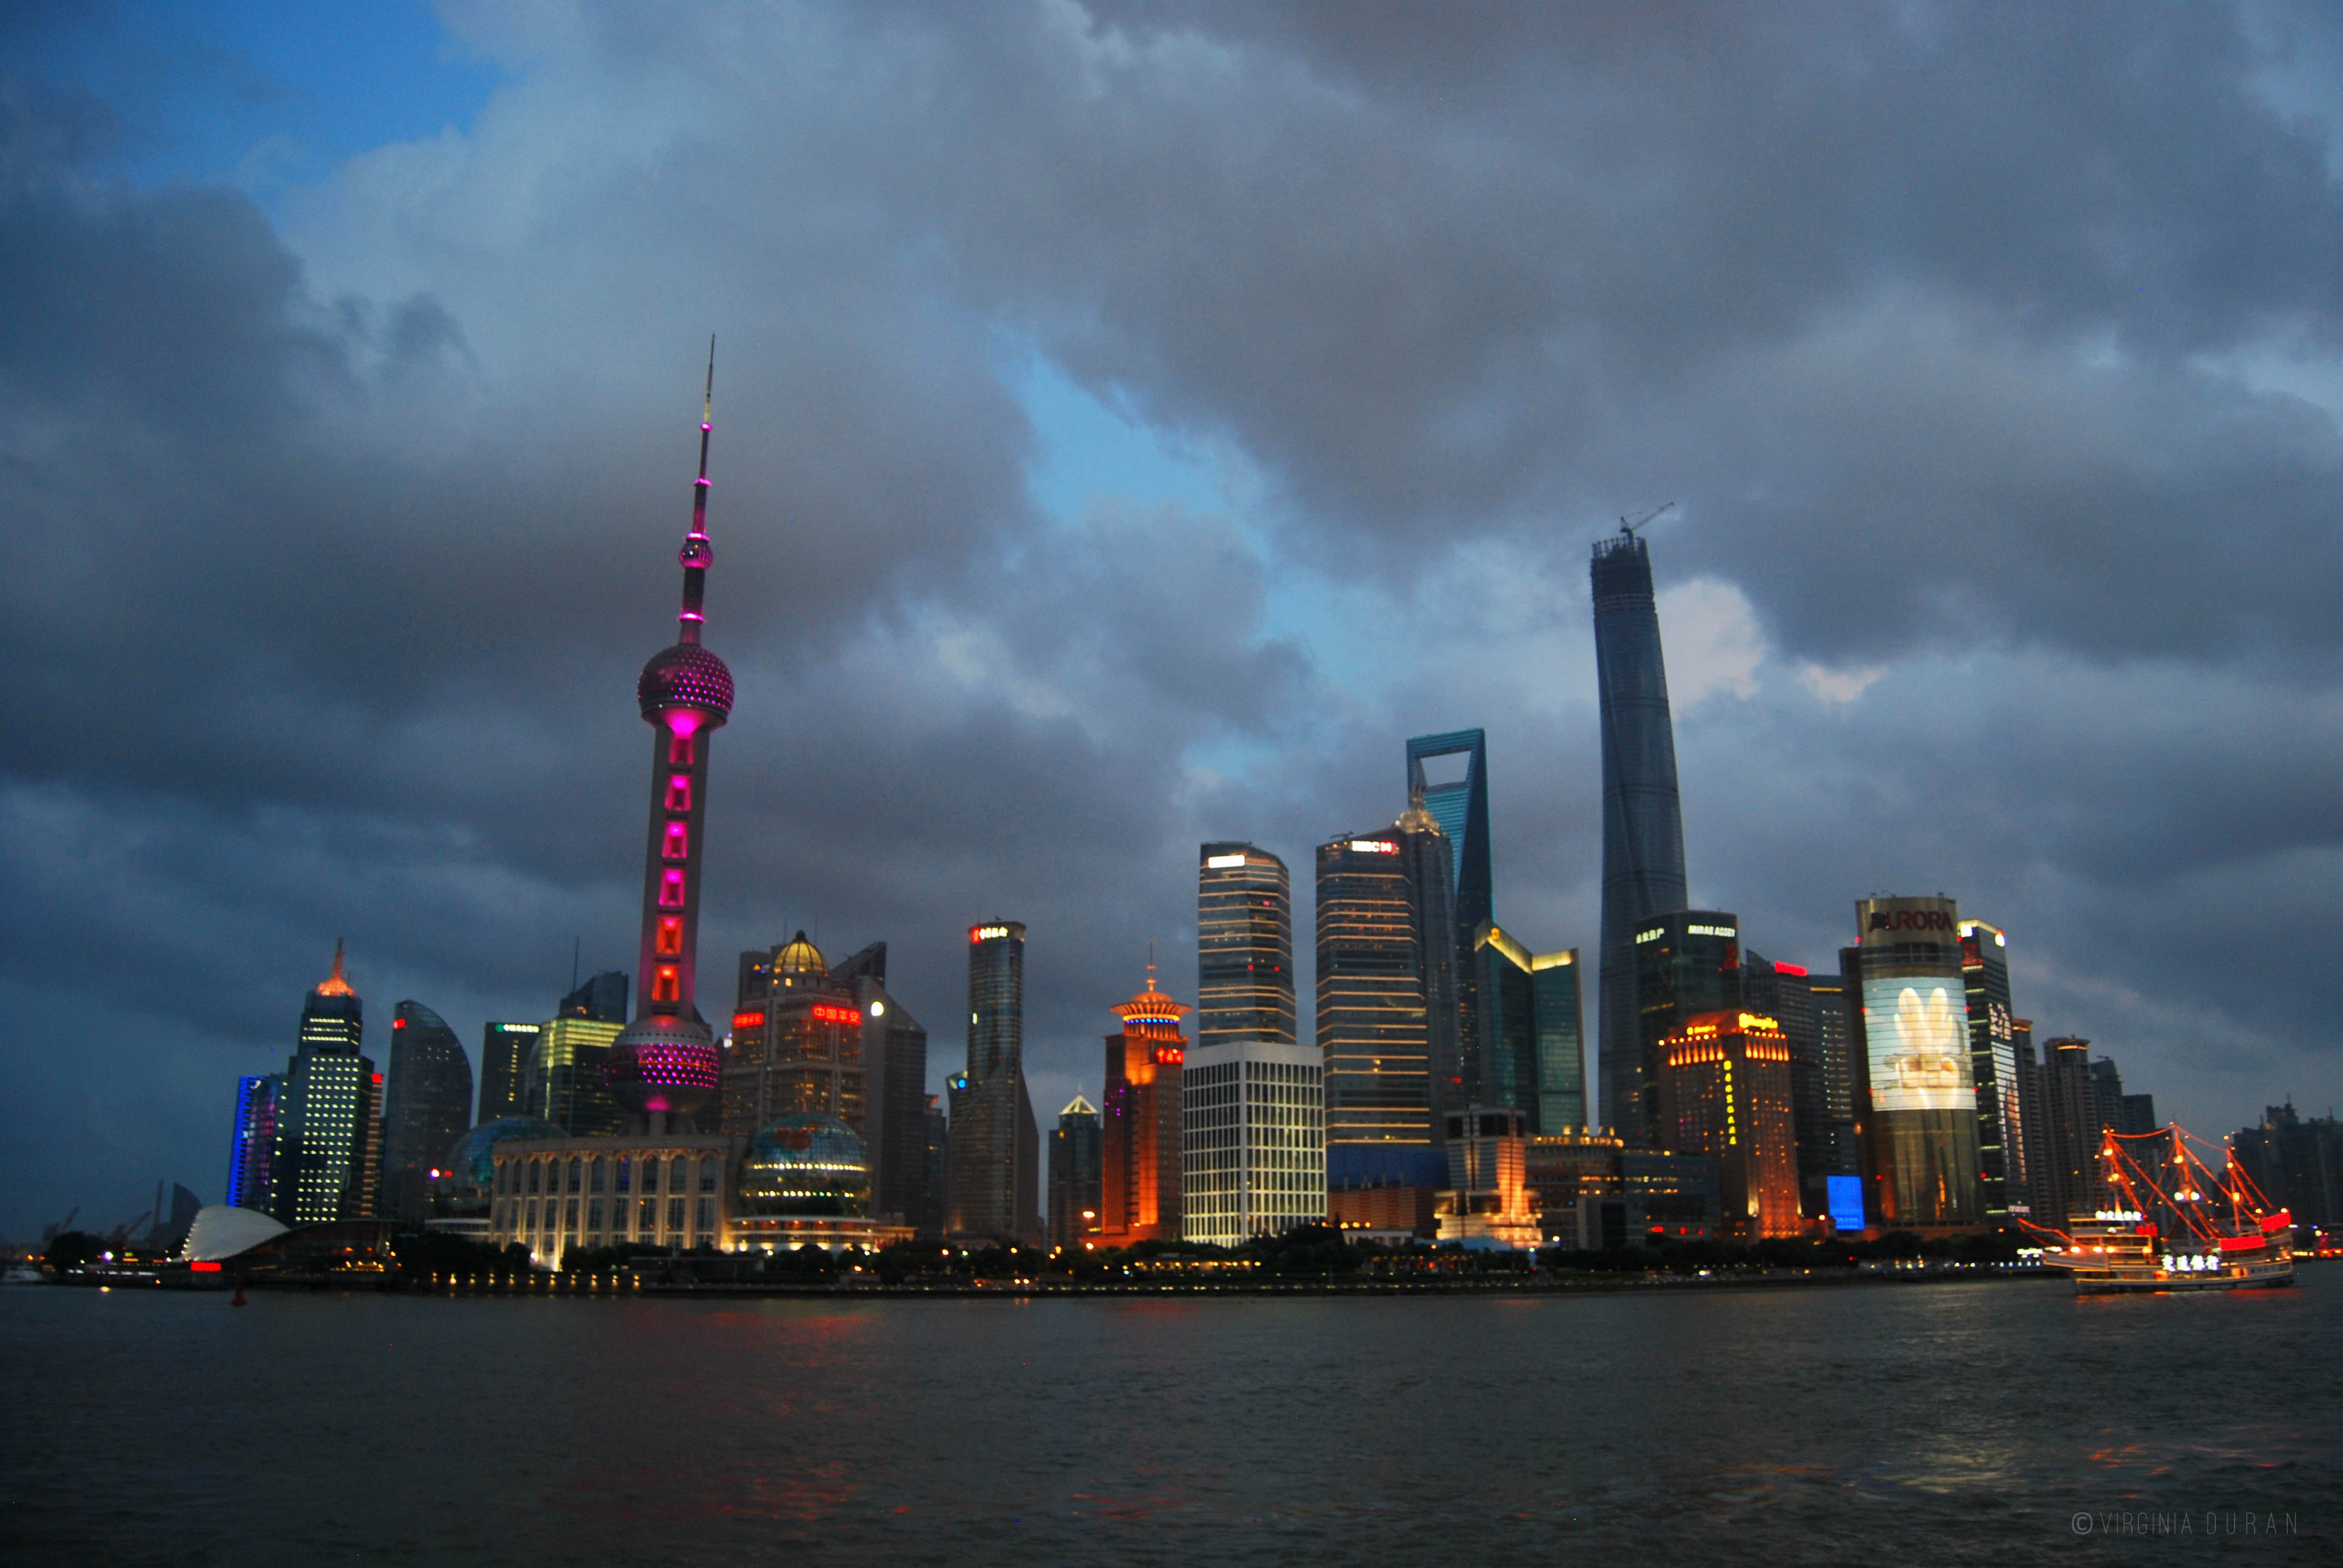 Download wallpaper: Shanghai iconic view 1920x1080